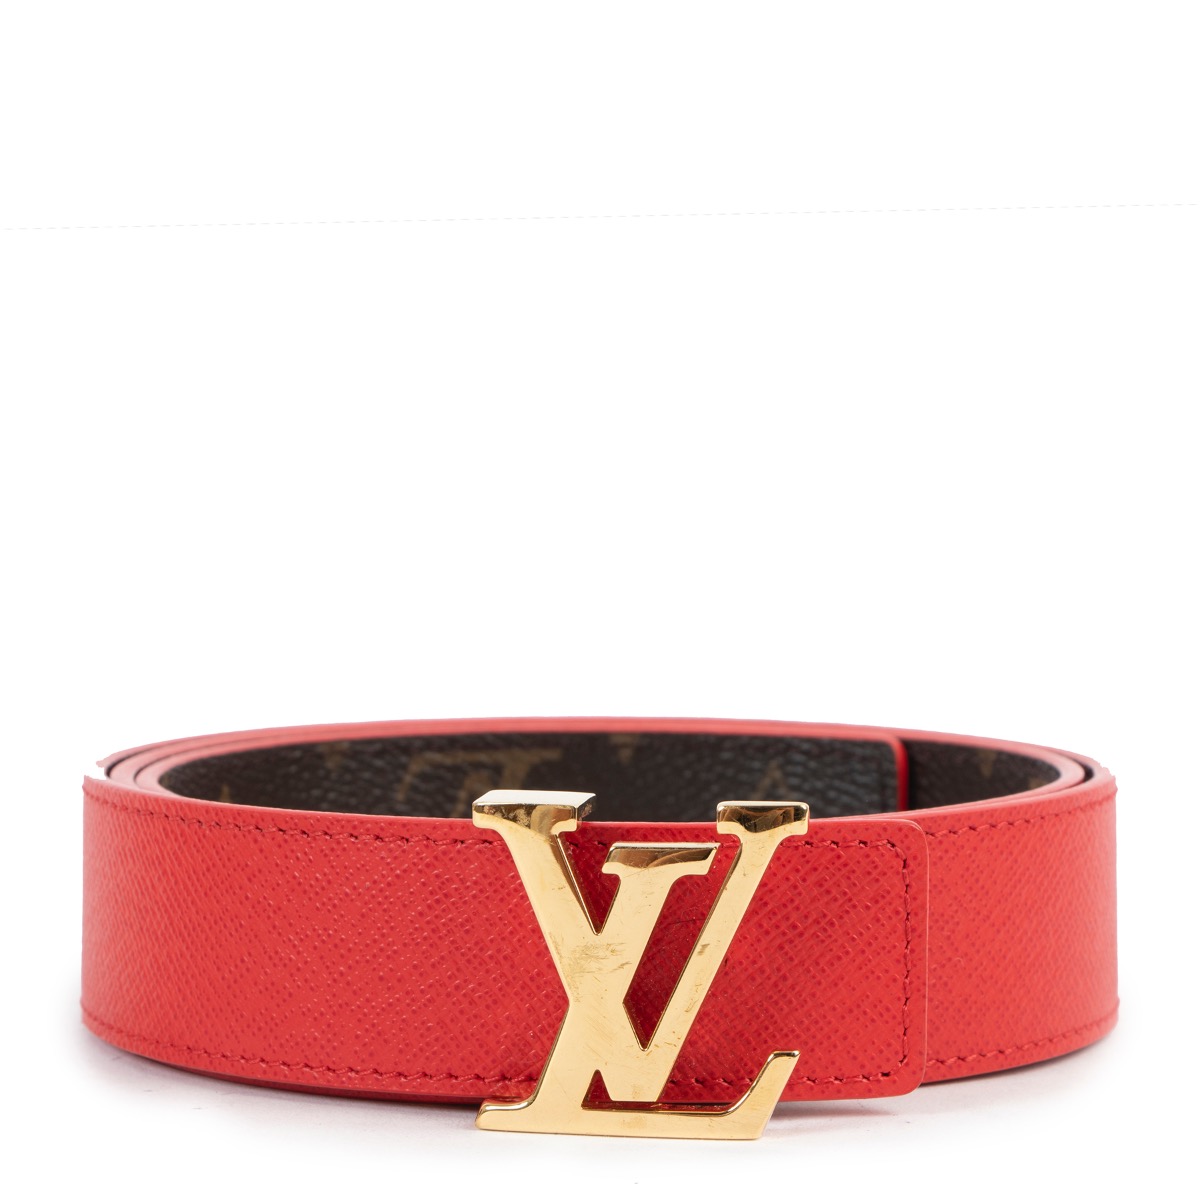 Louis Vuitton Red and Monogram Canvas Reversible Belt - Size 80